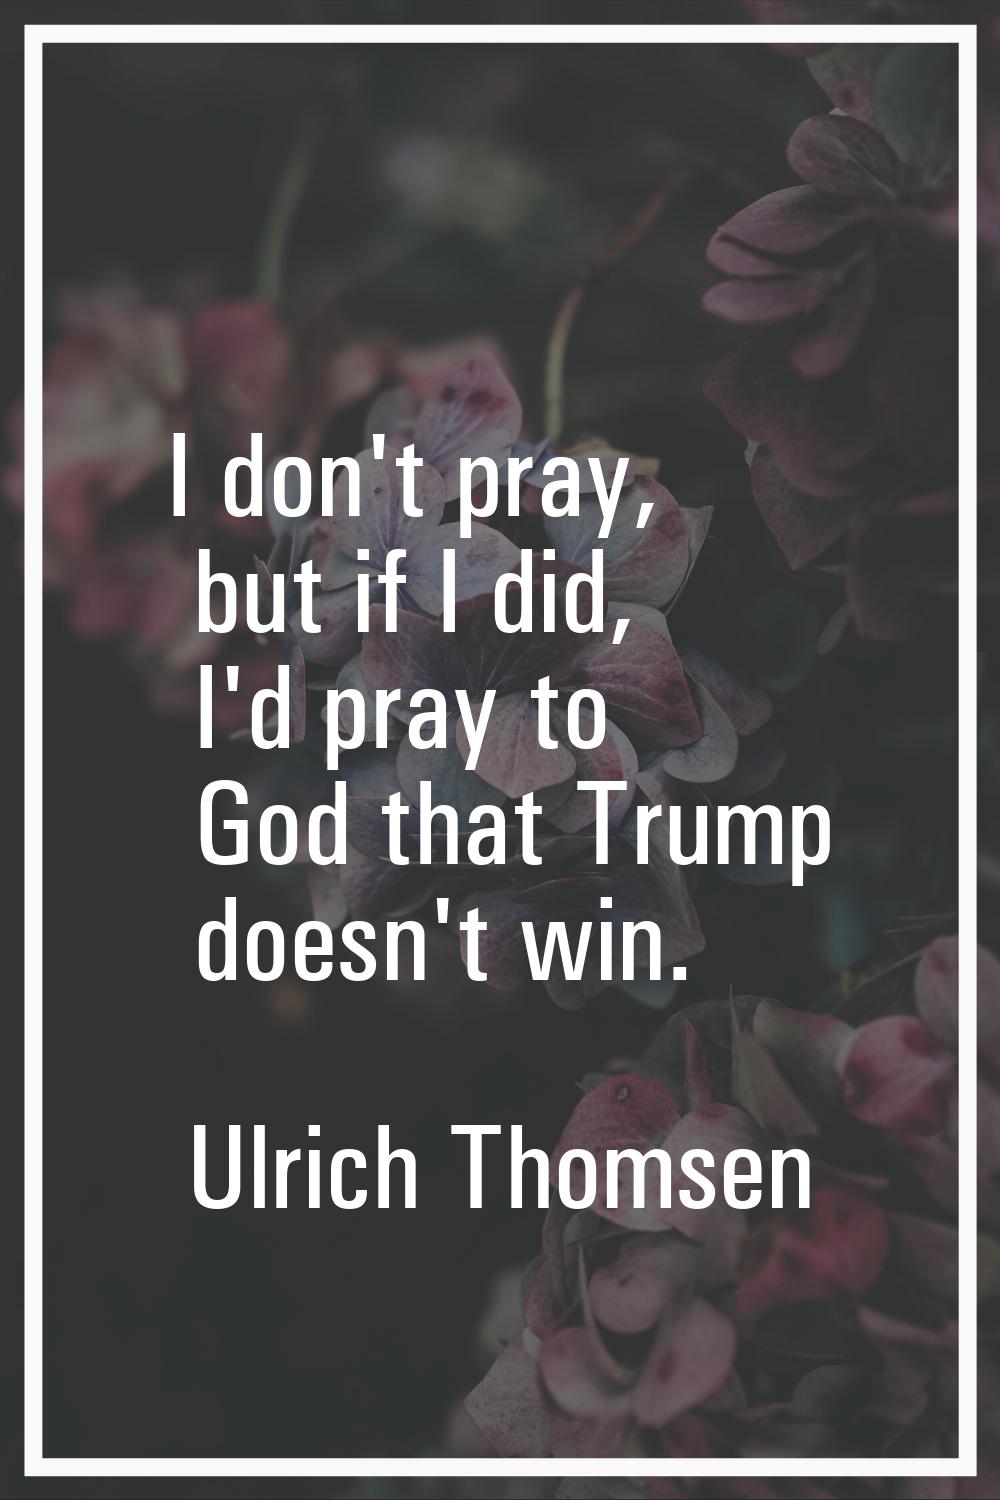 I don't pray, but if I did, I'd pray to God that Trump doesn't win.